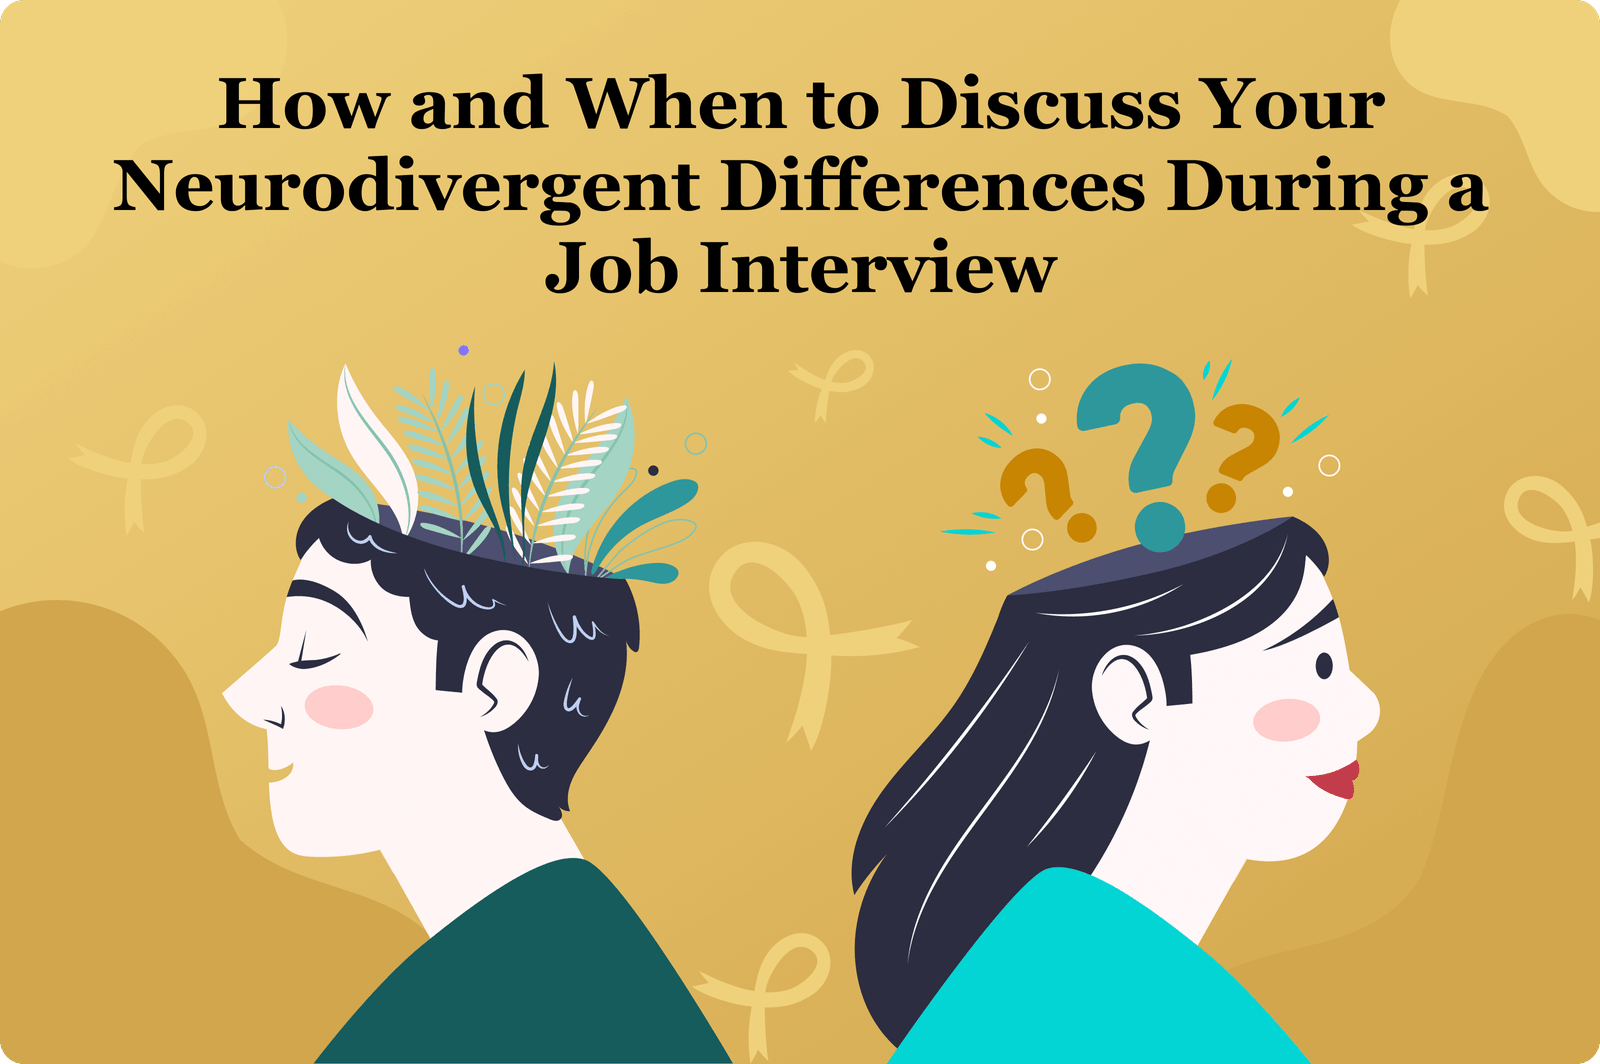 How and When to Discuss Your Neurodivergent Differences During a Job Interview